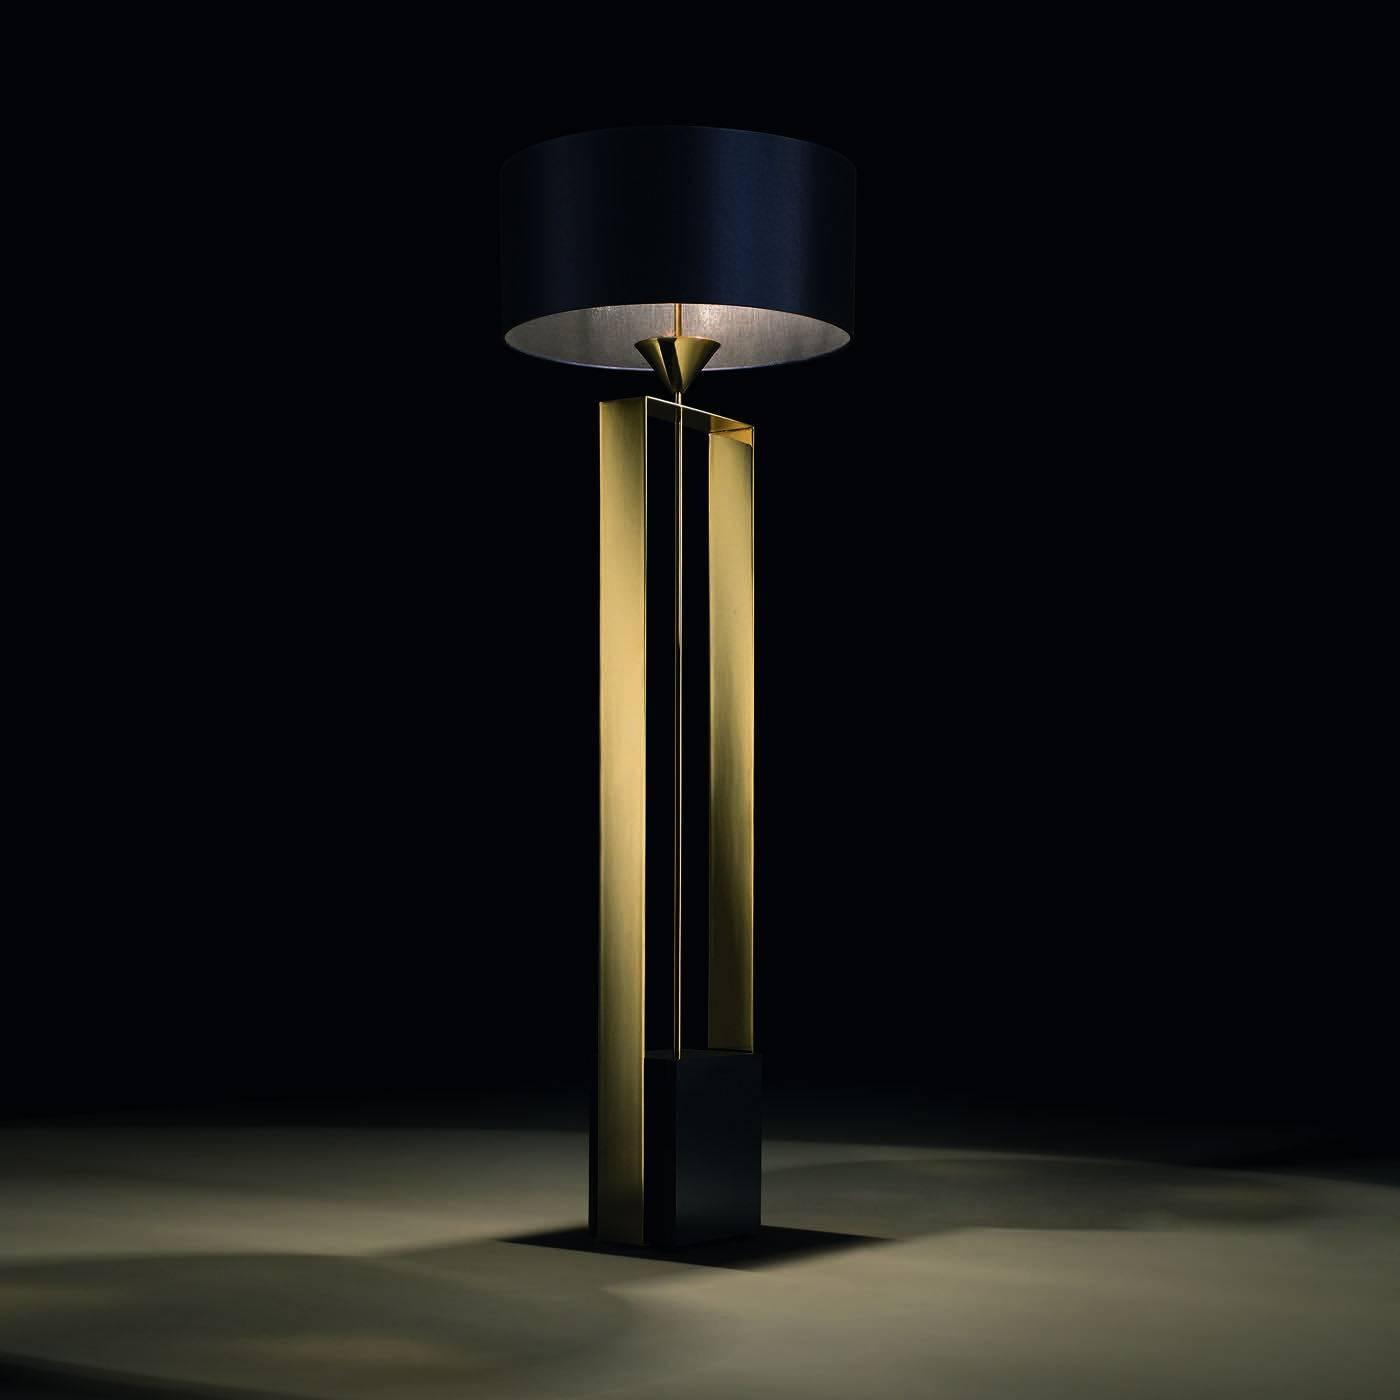 This elegant floor lamp projects its light downward. It has a structure in wood with a polished finish in dark blue. Vertical, gold-polished metal elements elongate the body of the lamp. The lampshade is in the same dark blue nuance of the body.